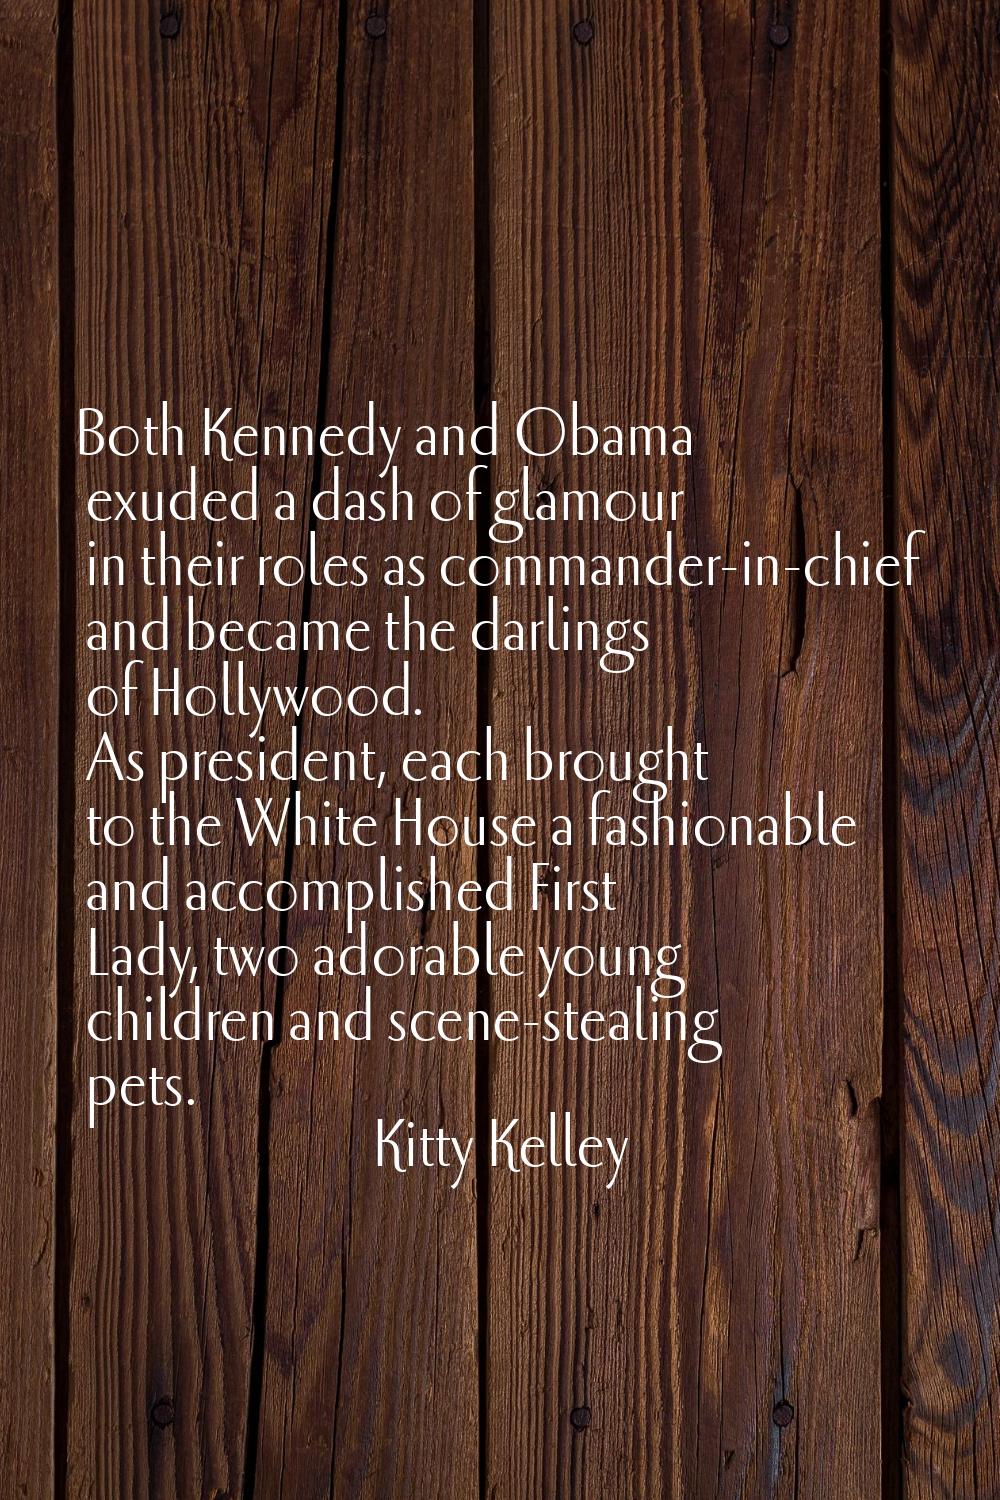 Both Kennedy and Obama exuded a dash of glamour in their roles as commander-in-chief and became the